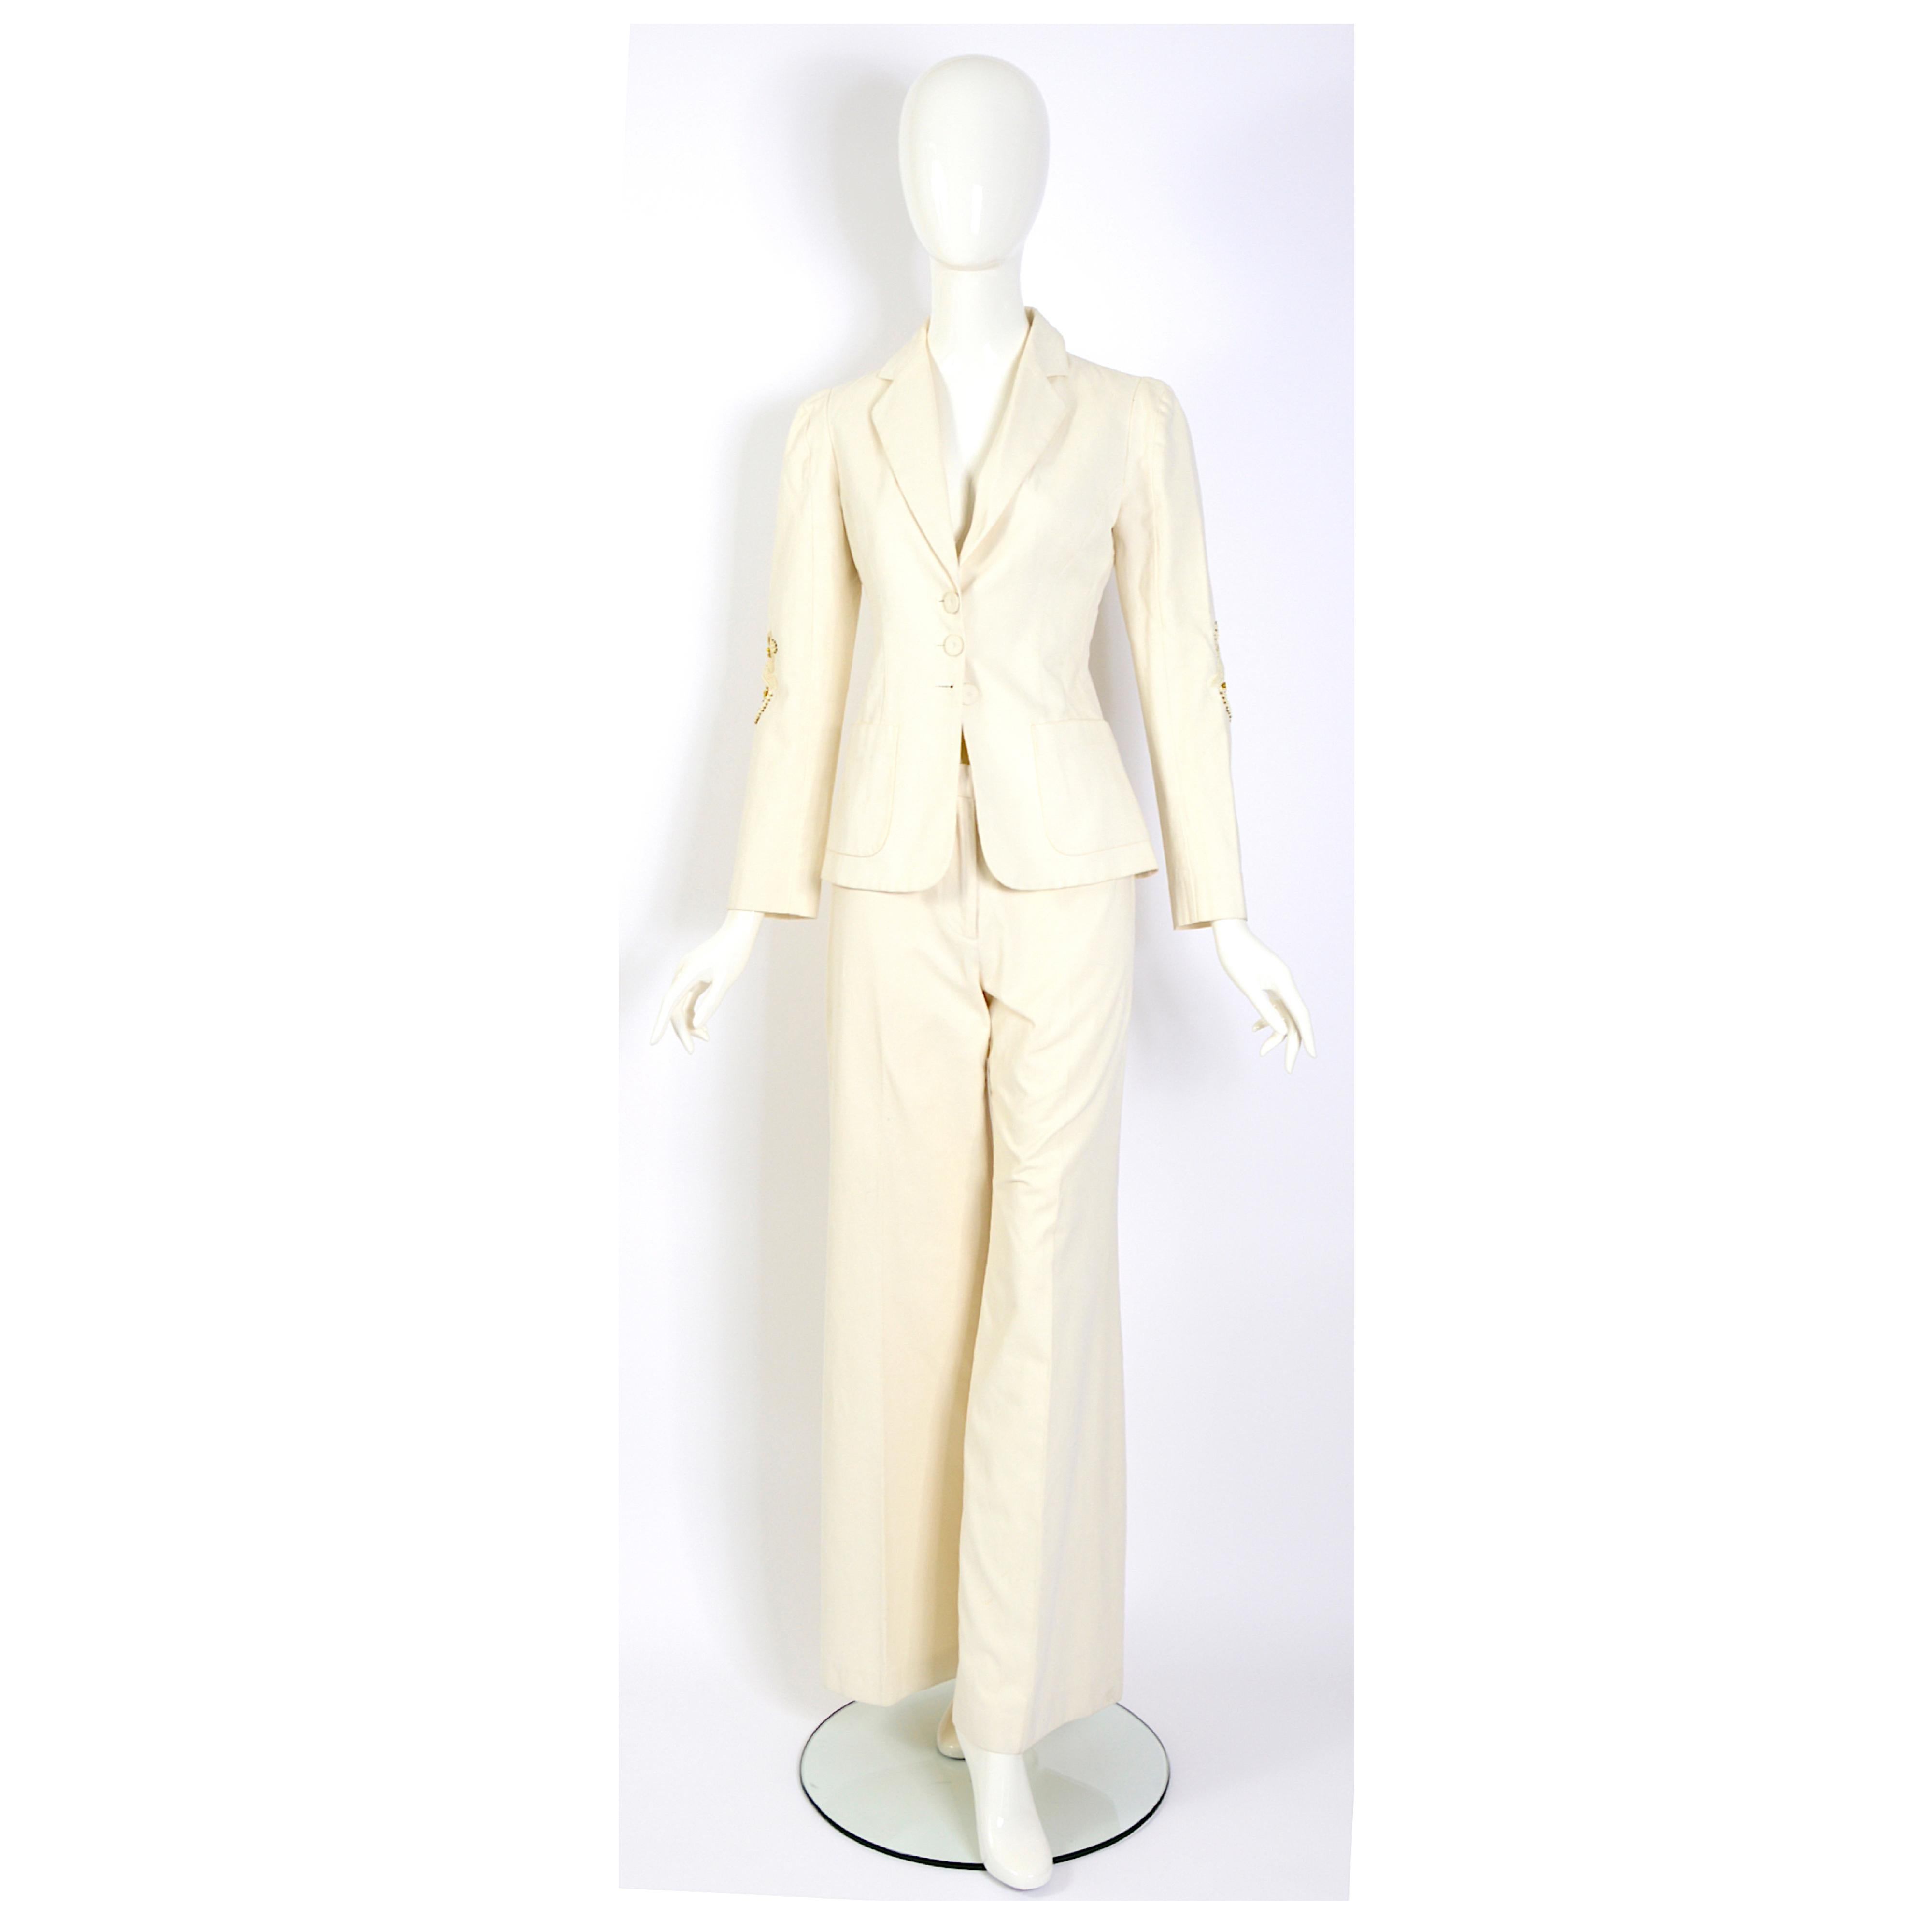 Chloé by Phoebe Philo vintage S/S 2002 embellished back and sleeves cream suit In Good Condition For Sale In Antwerpen, Vlaams Gewest